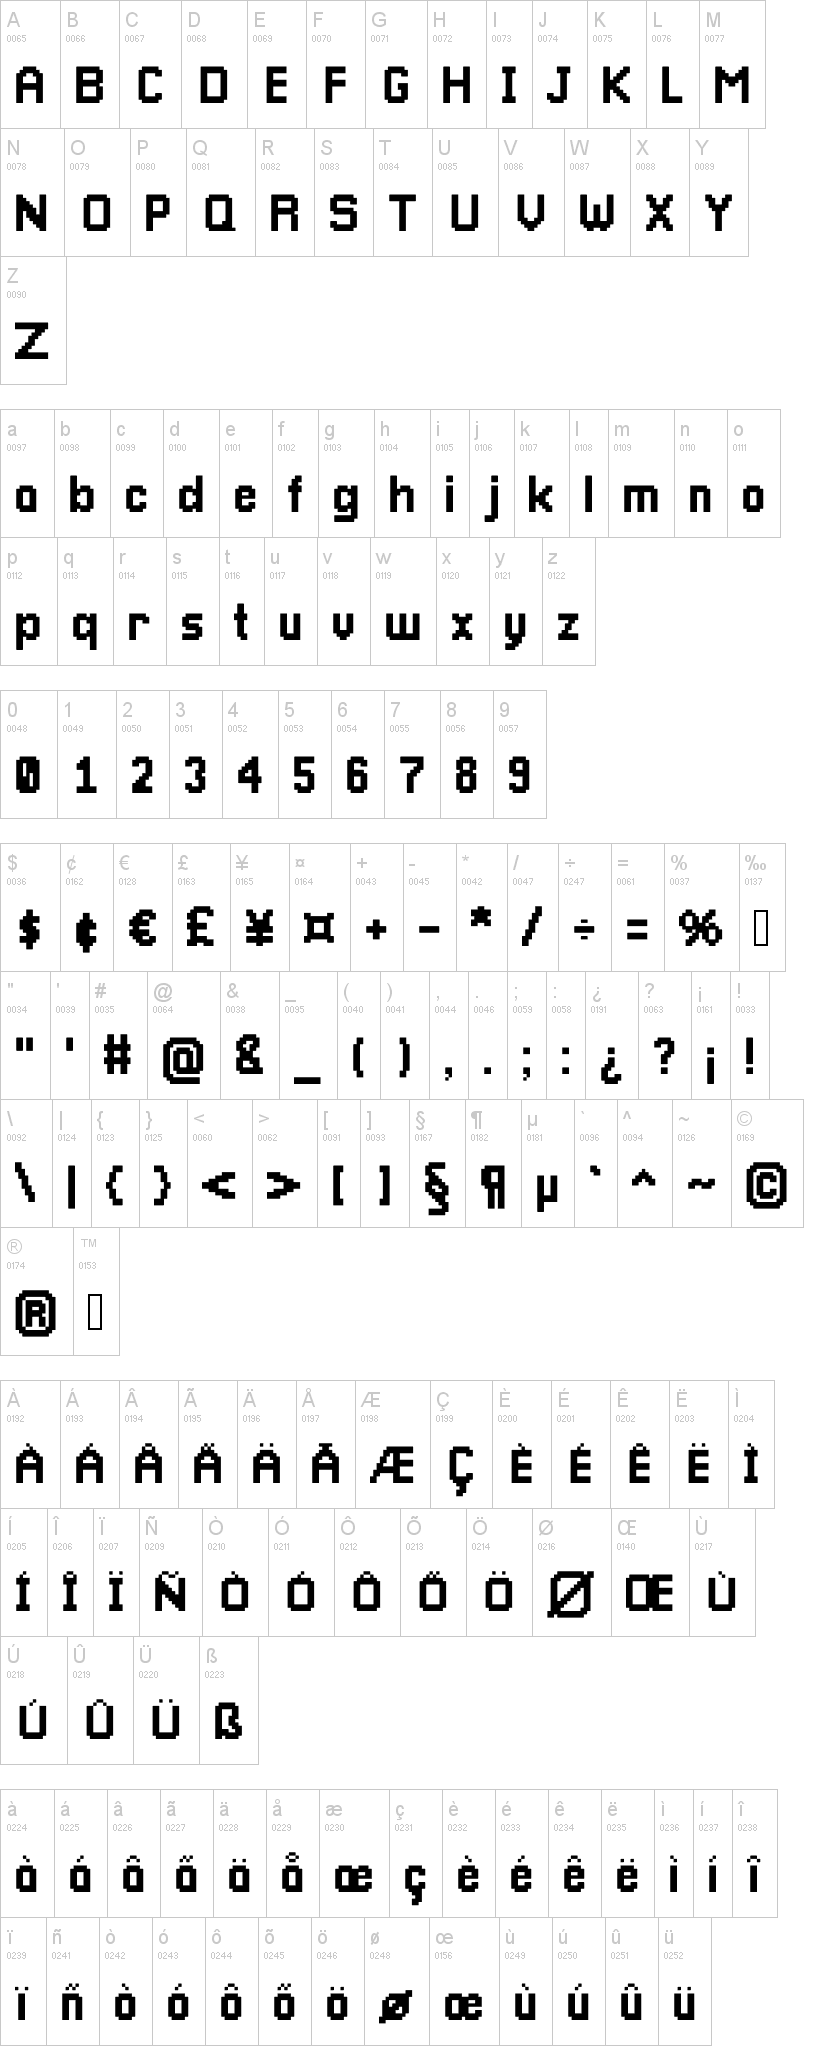 An image showing most of the characters in the typeface.